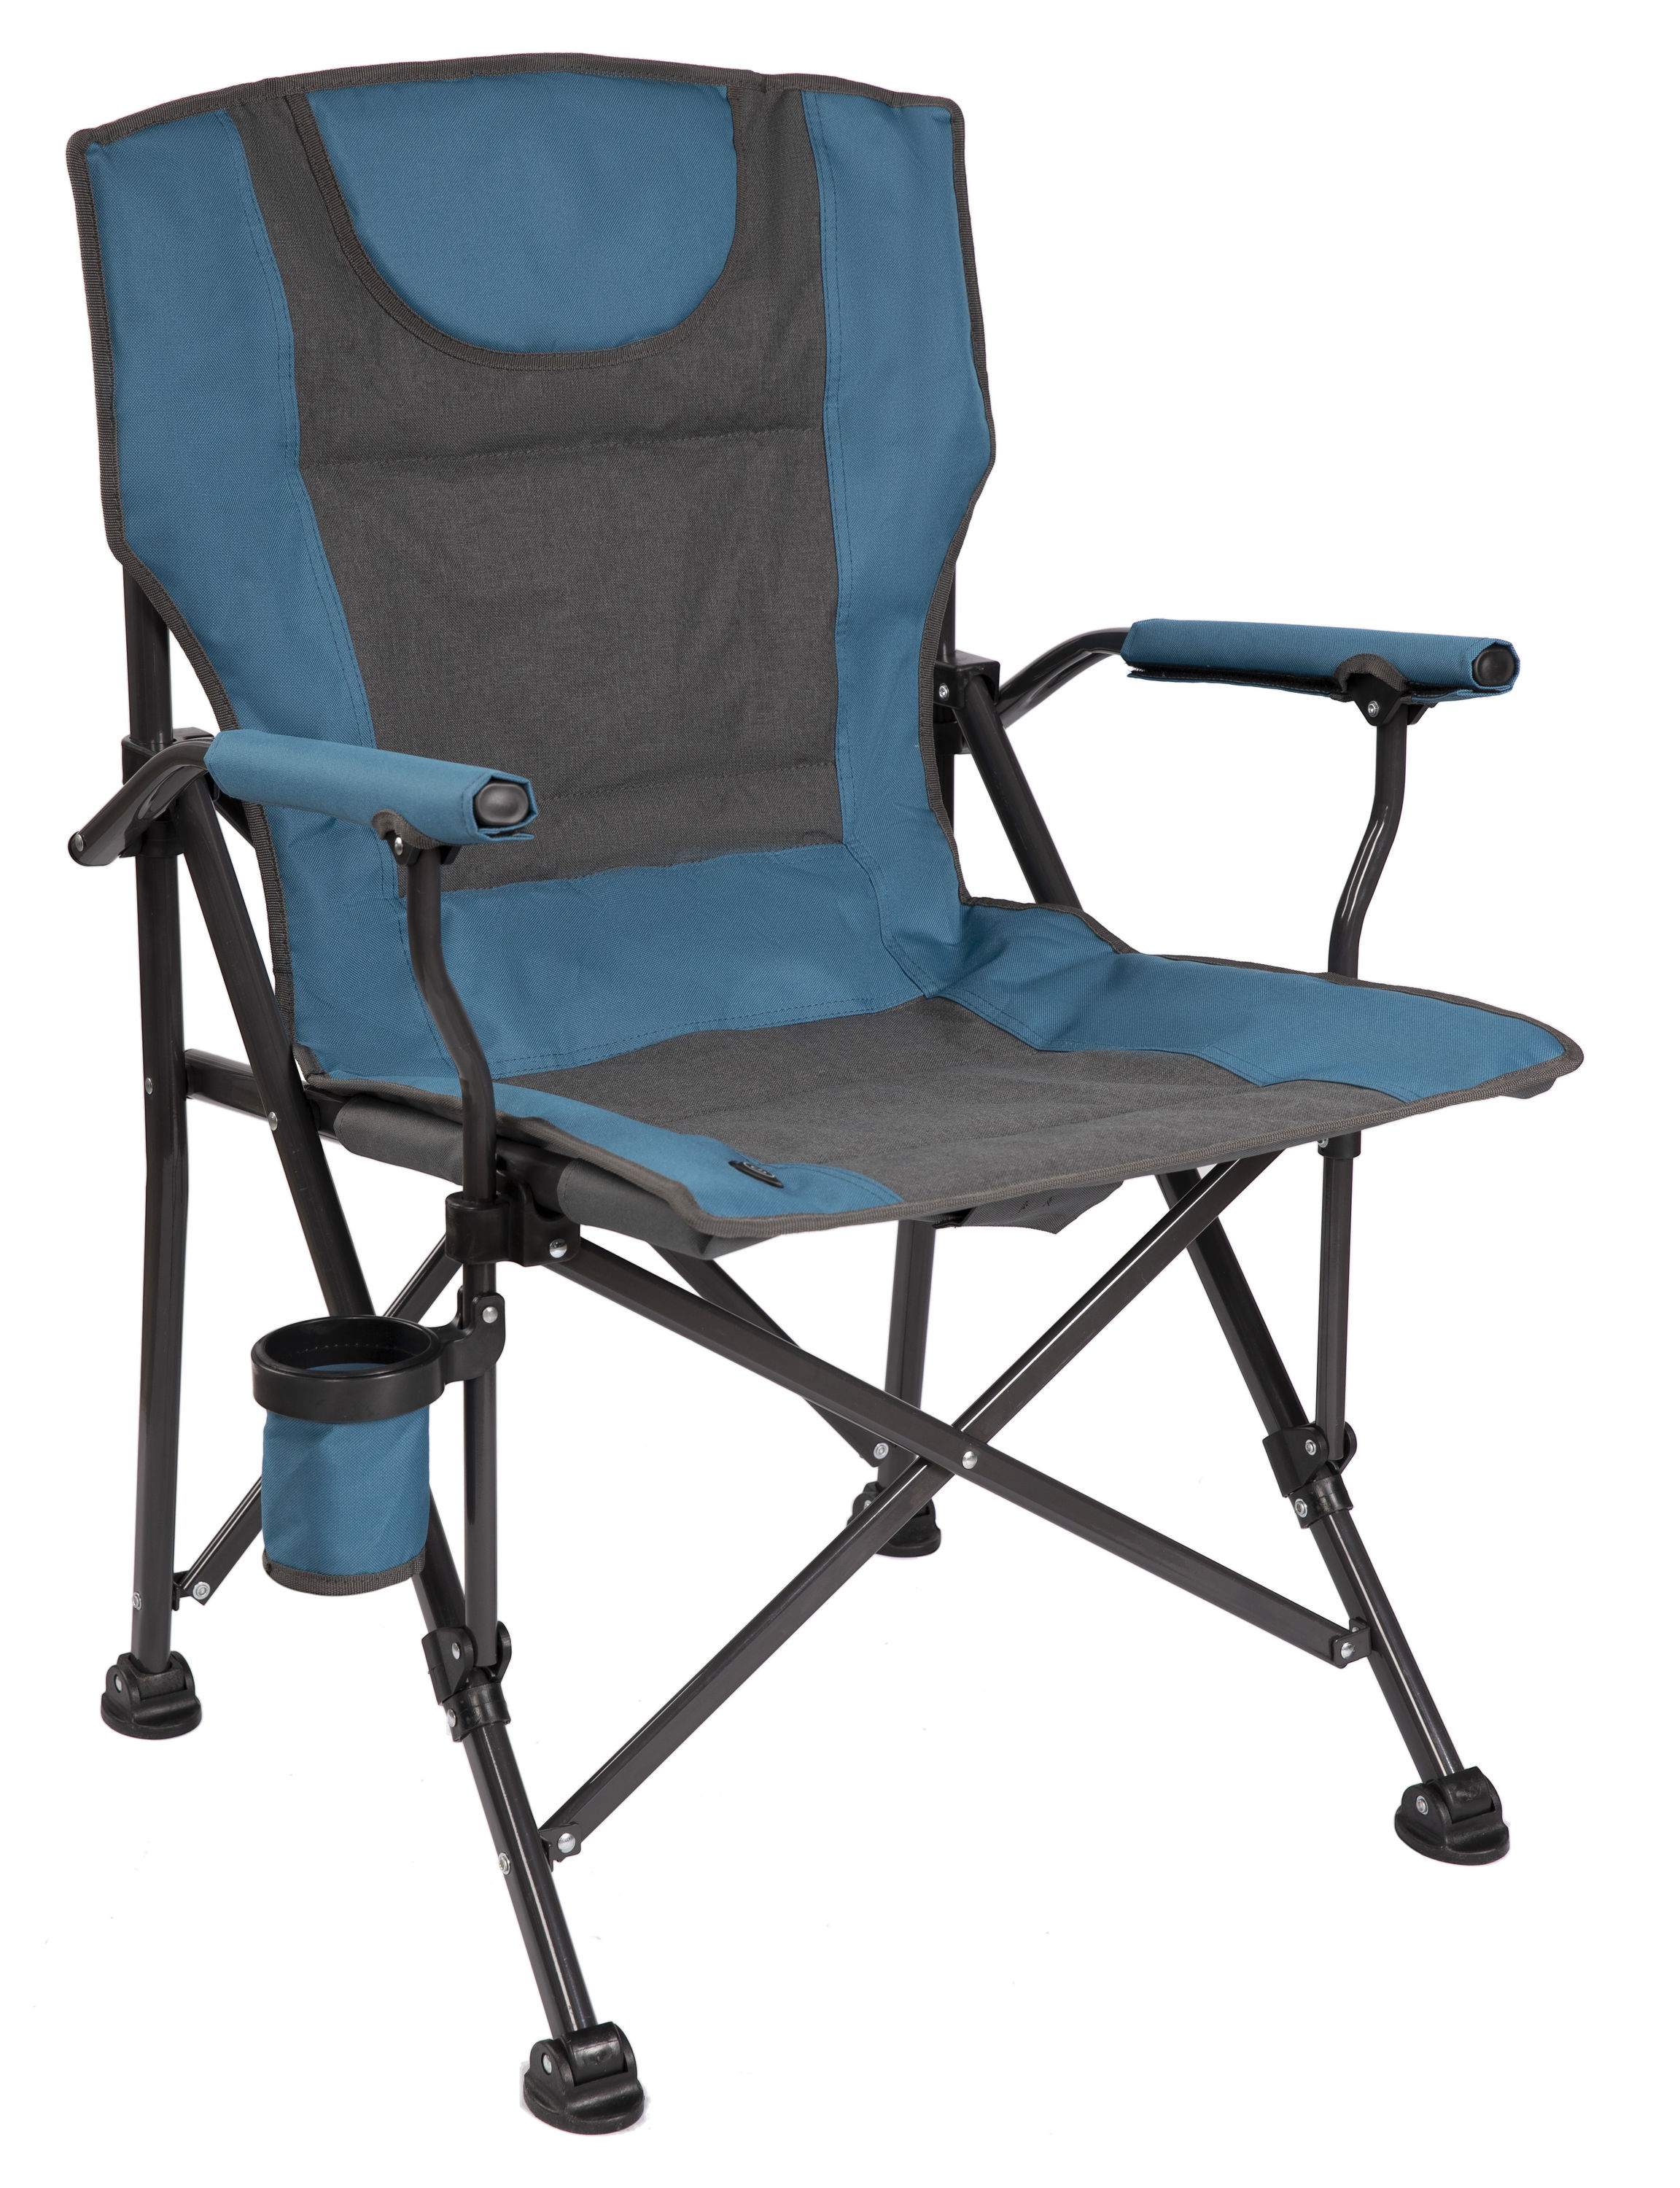 Backyard Expressions Polyester Blue/Grey Folding Camping Chair